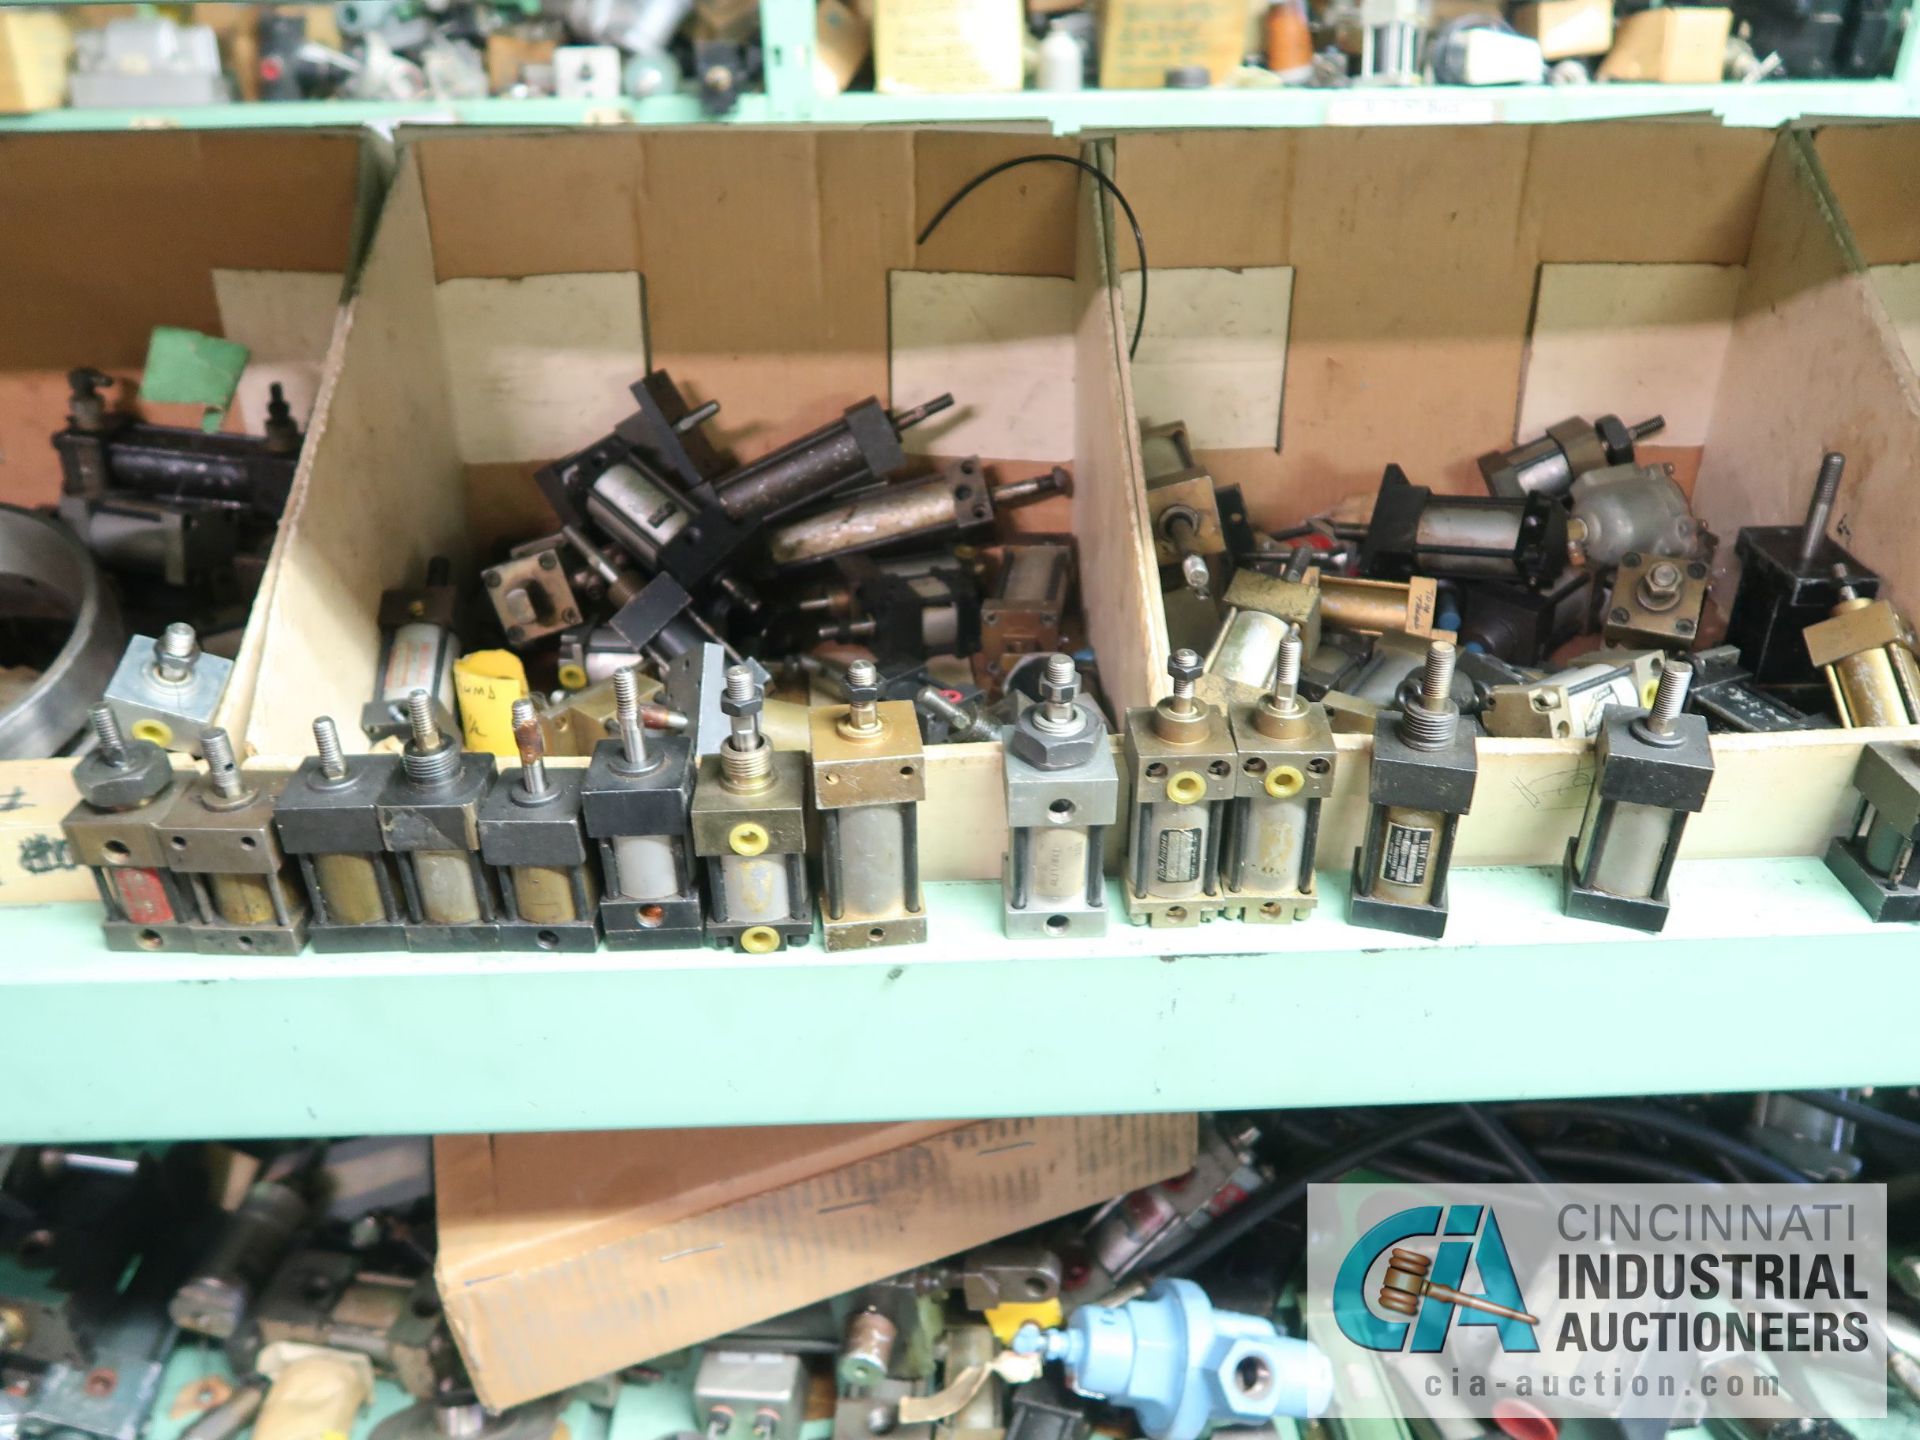 CONTENTS OF (5) RACKS INCLUDING MISCELLANEOUS PNEUMATIC CYLINDERS **NO RACKS** - Image 6 of 31